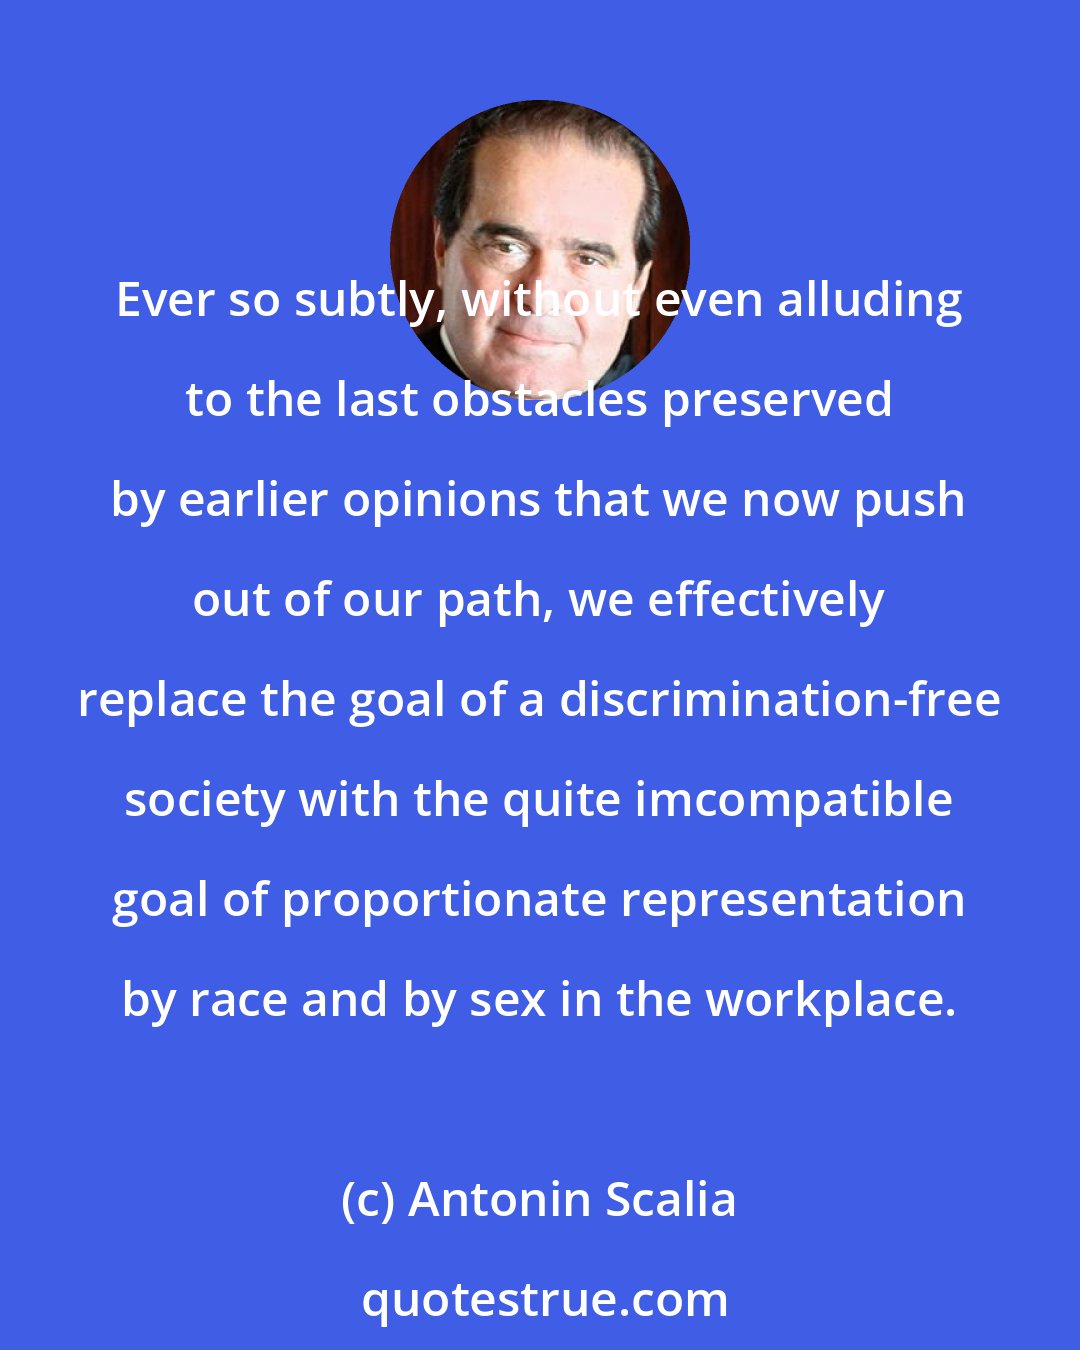 Antonin Scalia: Ever so subtly, without even alluding to the last obstacles preserved by earlier opinions that we now push out of our path, we effectively replace the goal of a discrimination-free society with the quite imcompatible goal of proportionate representation by race and by sex in the workplace.